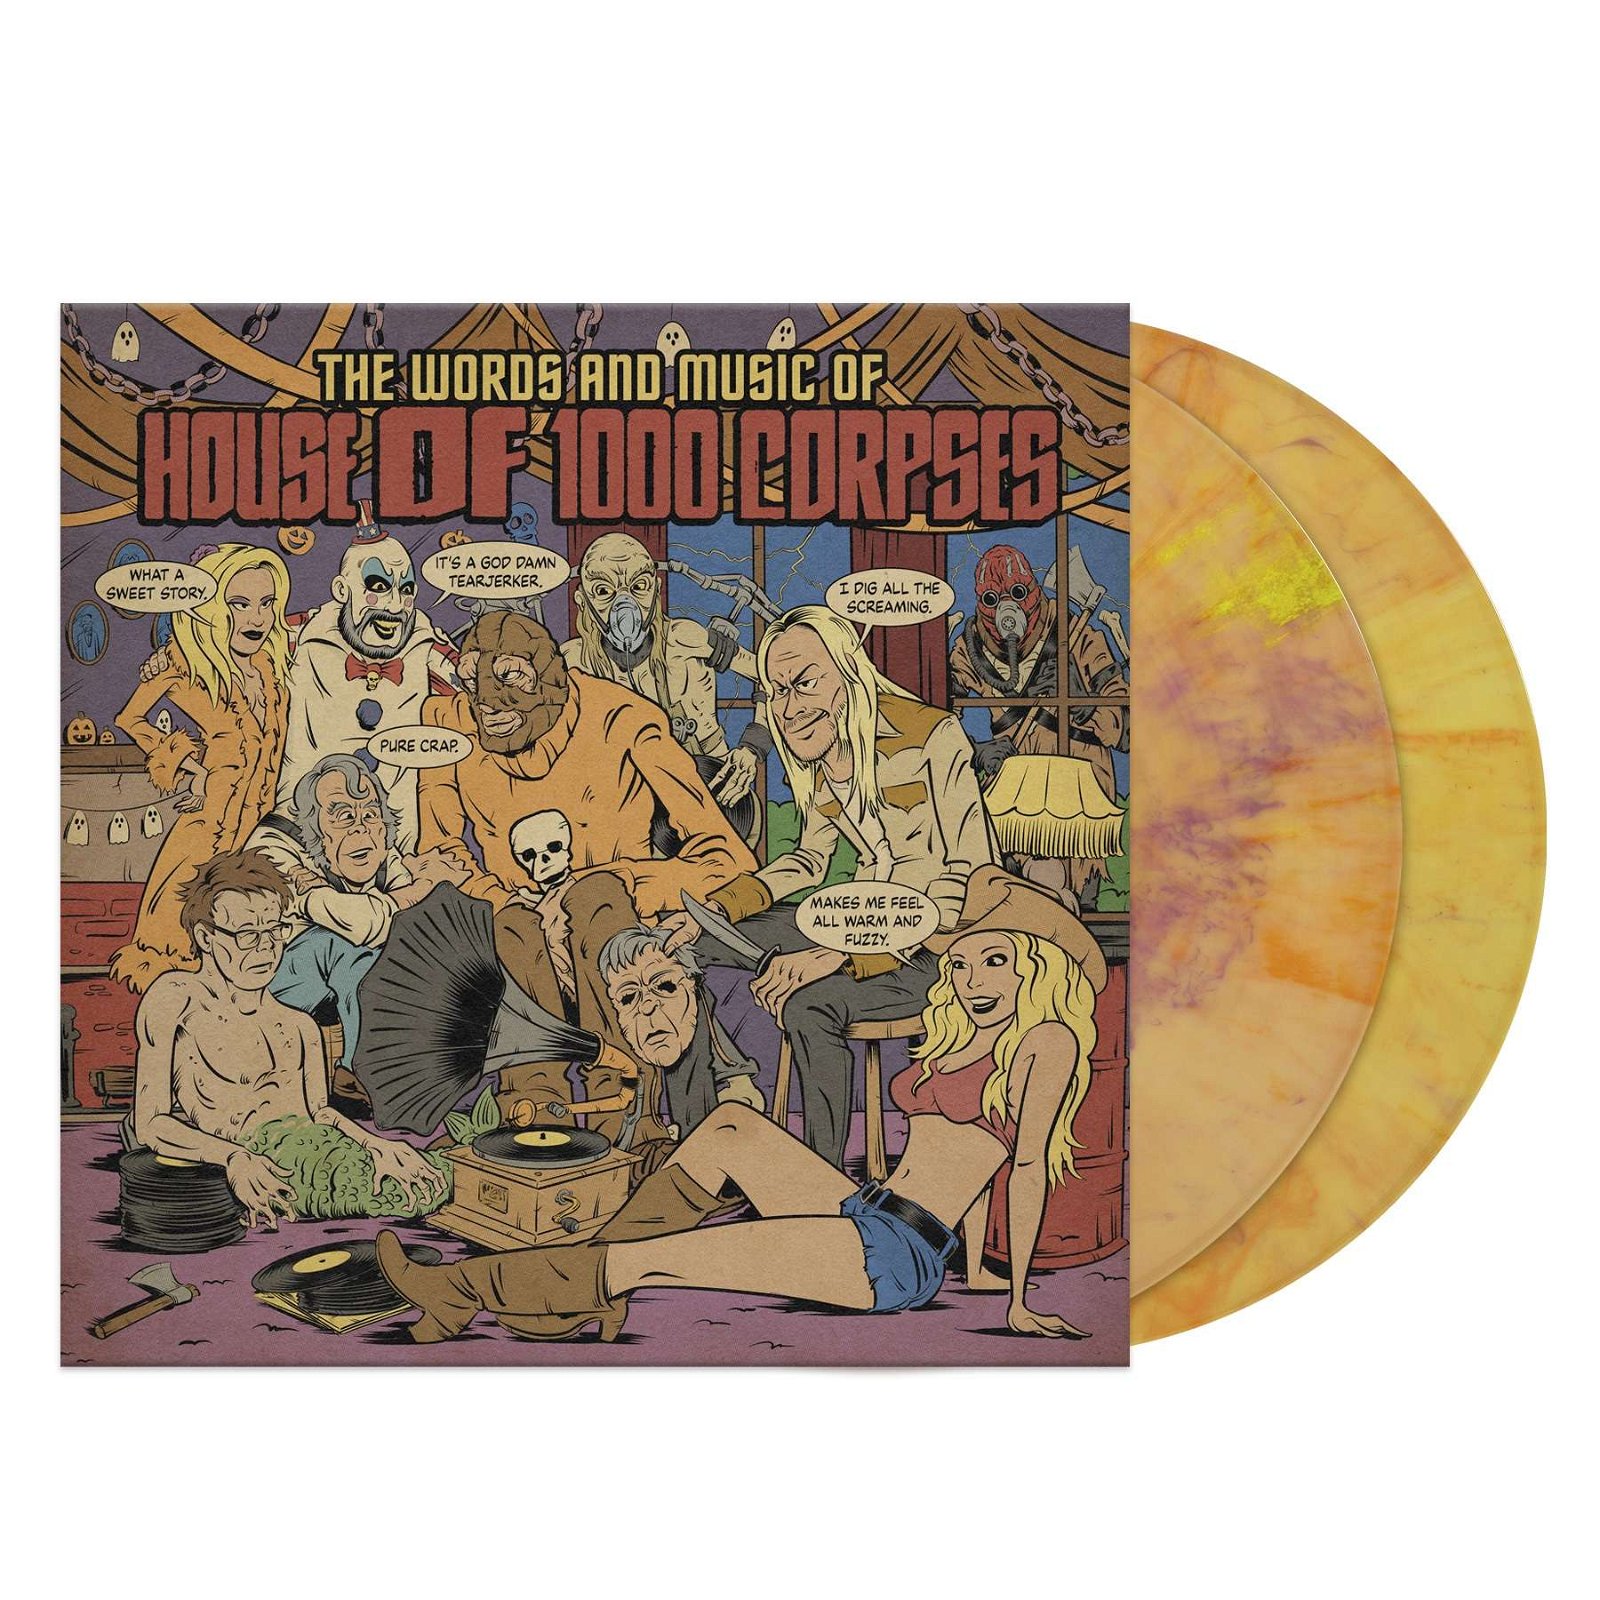 CD Shop - ZOMBIE, ROB THE WORDS & MUSIC OF HOUSE OF 1000 CORPSES